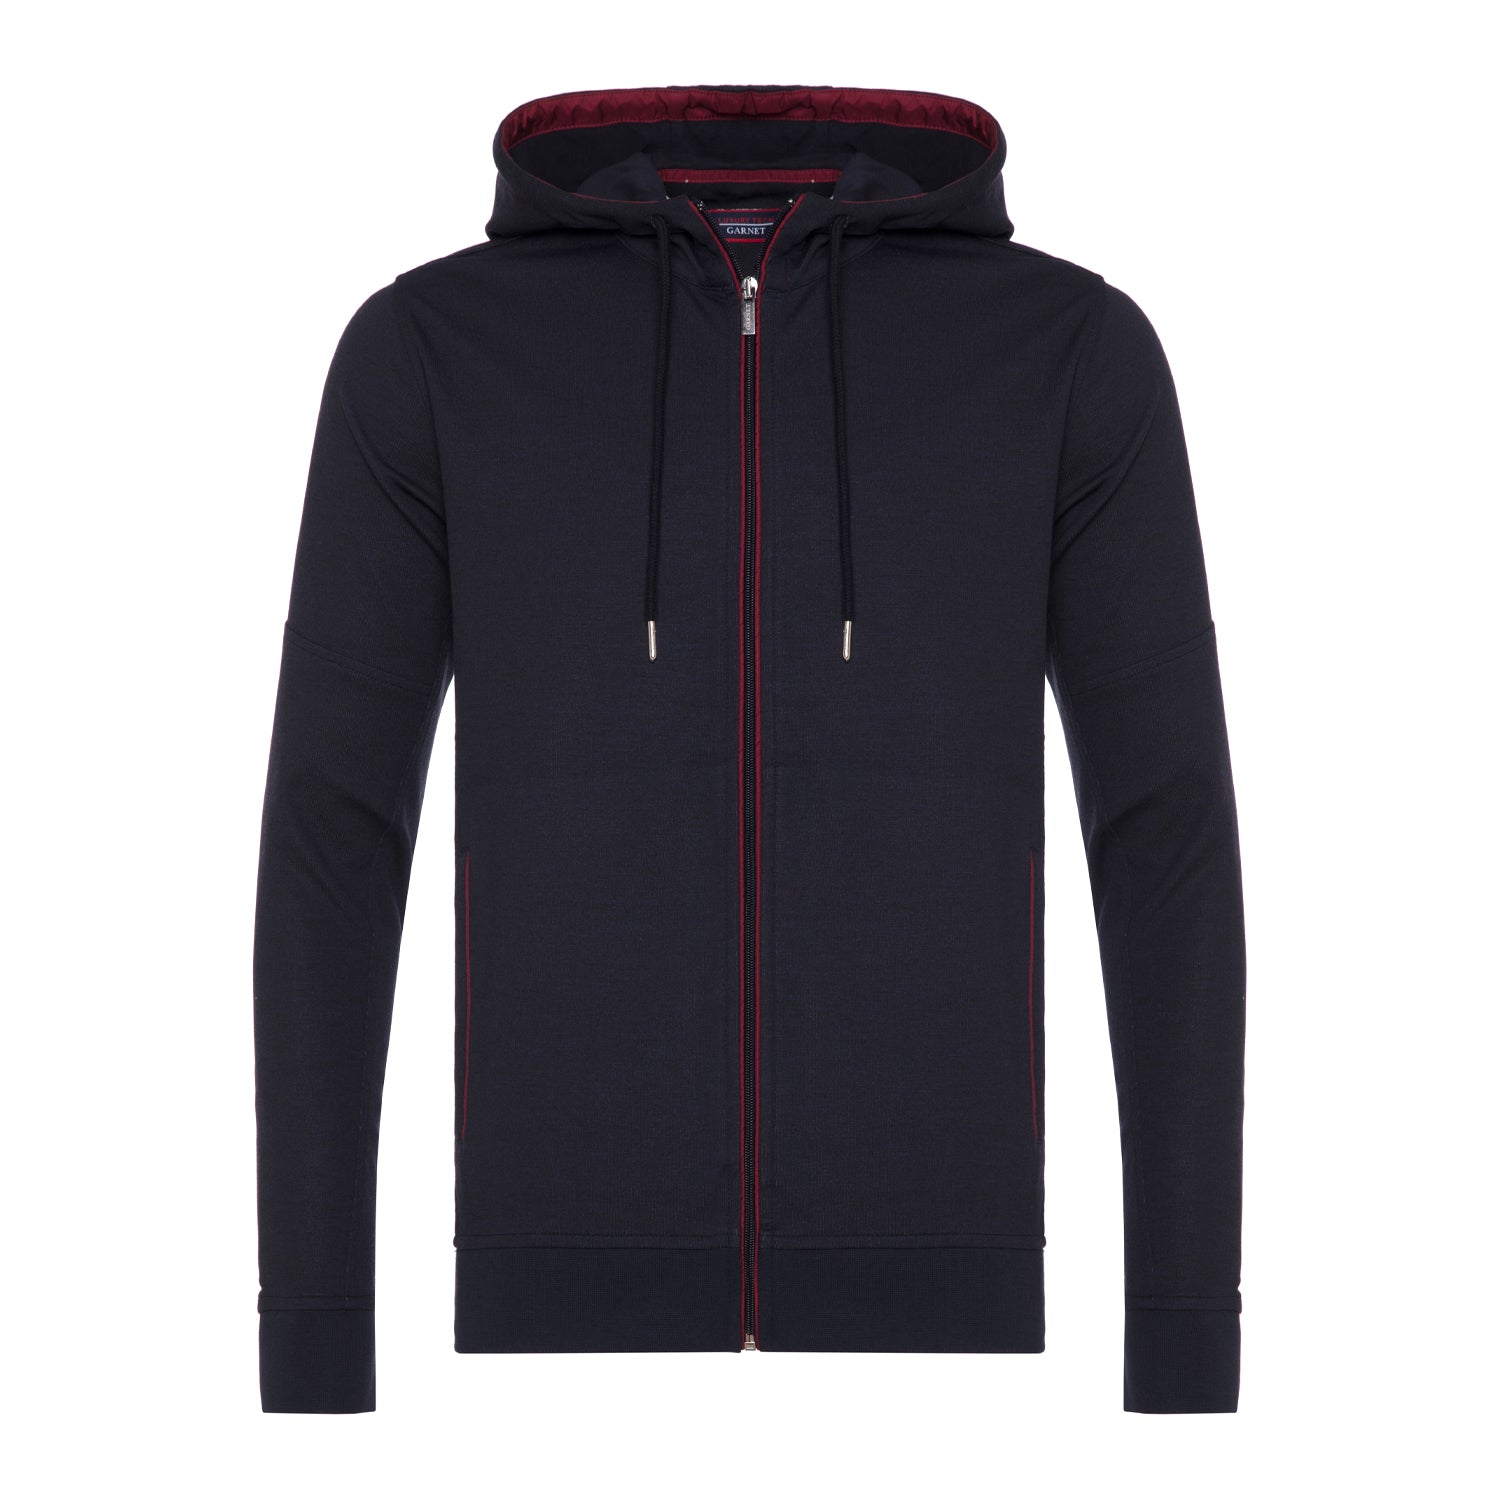 Full Zip Tracksuit Set With Hood in Navy